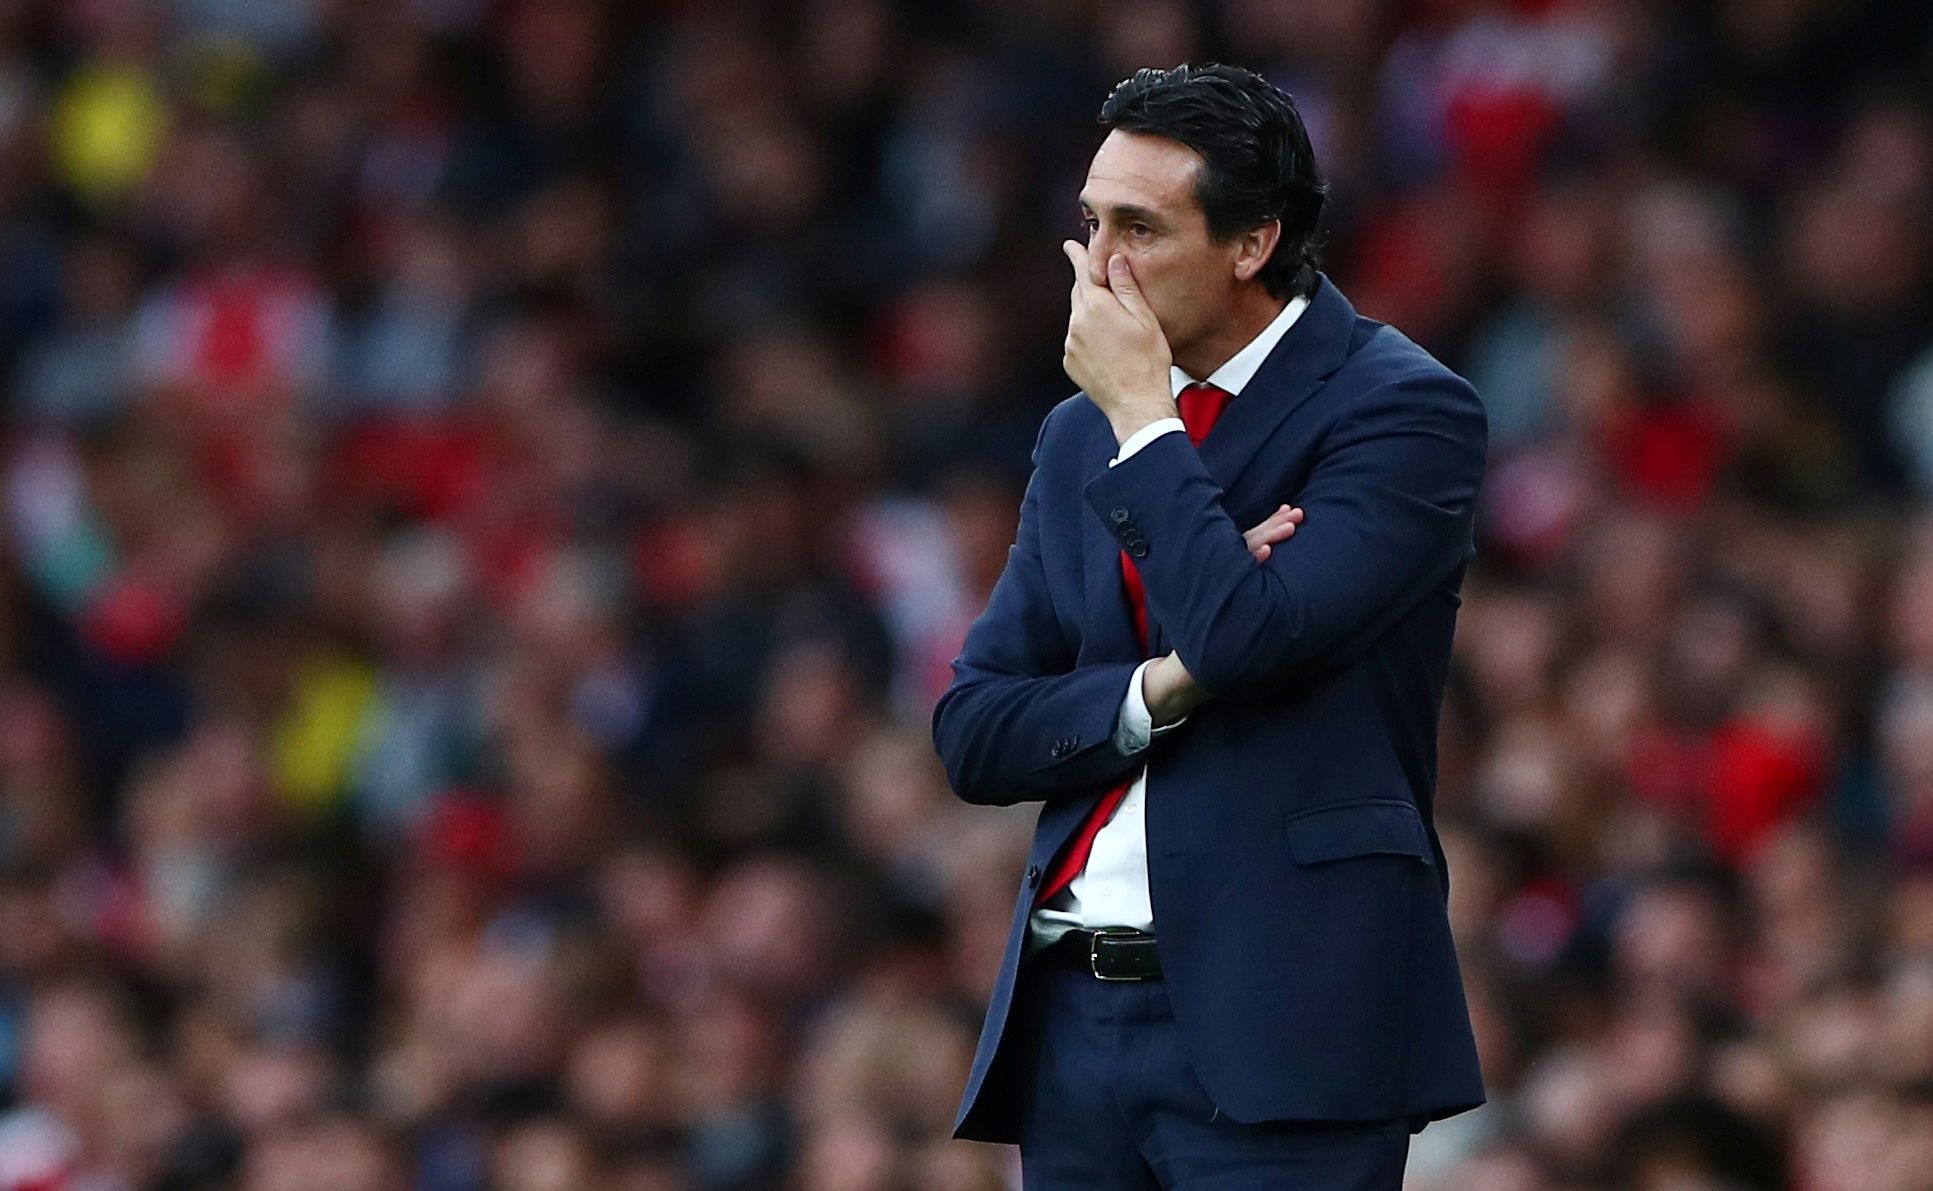 Soccer Football - Premier League - Arsenal v Aston Villa - Emirates Stadium, London, Britain - September 22, 2019  Arsenal manager Unai Emery   REUTERS/Hannah McKay  EDITORIAL USE ONLY. No use with unauthorized audio, video, data, fixture lists, club/league logos or 